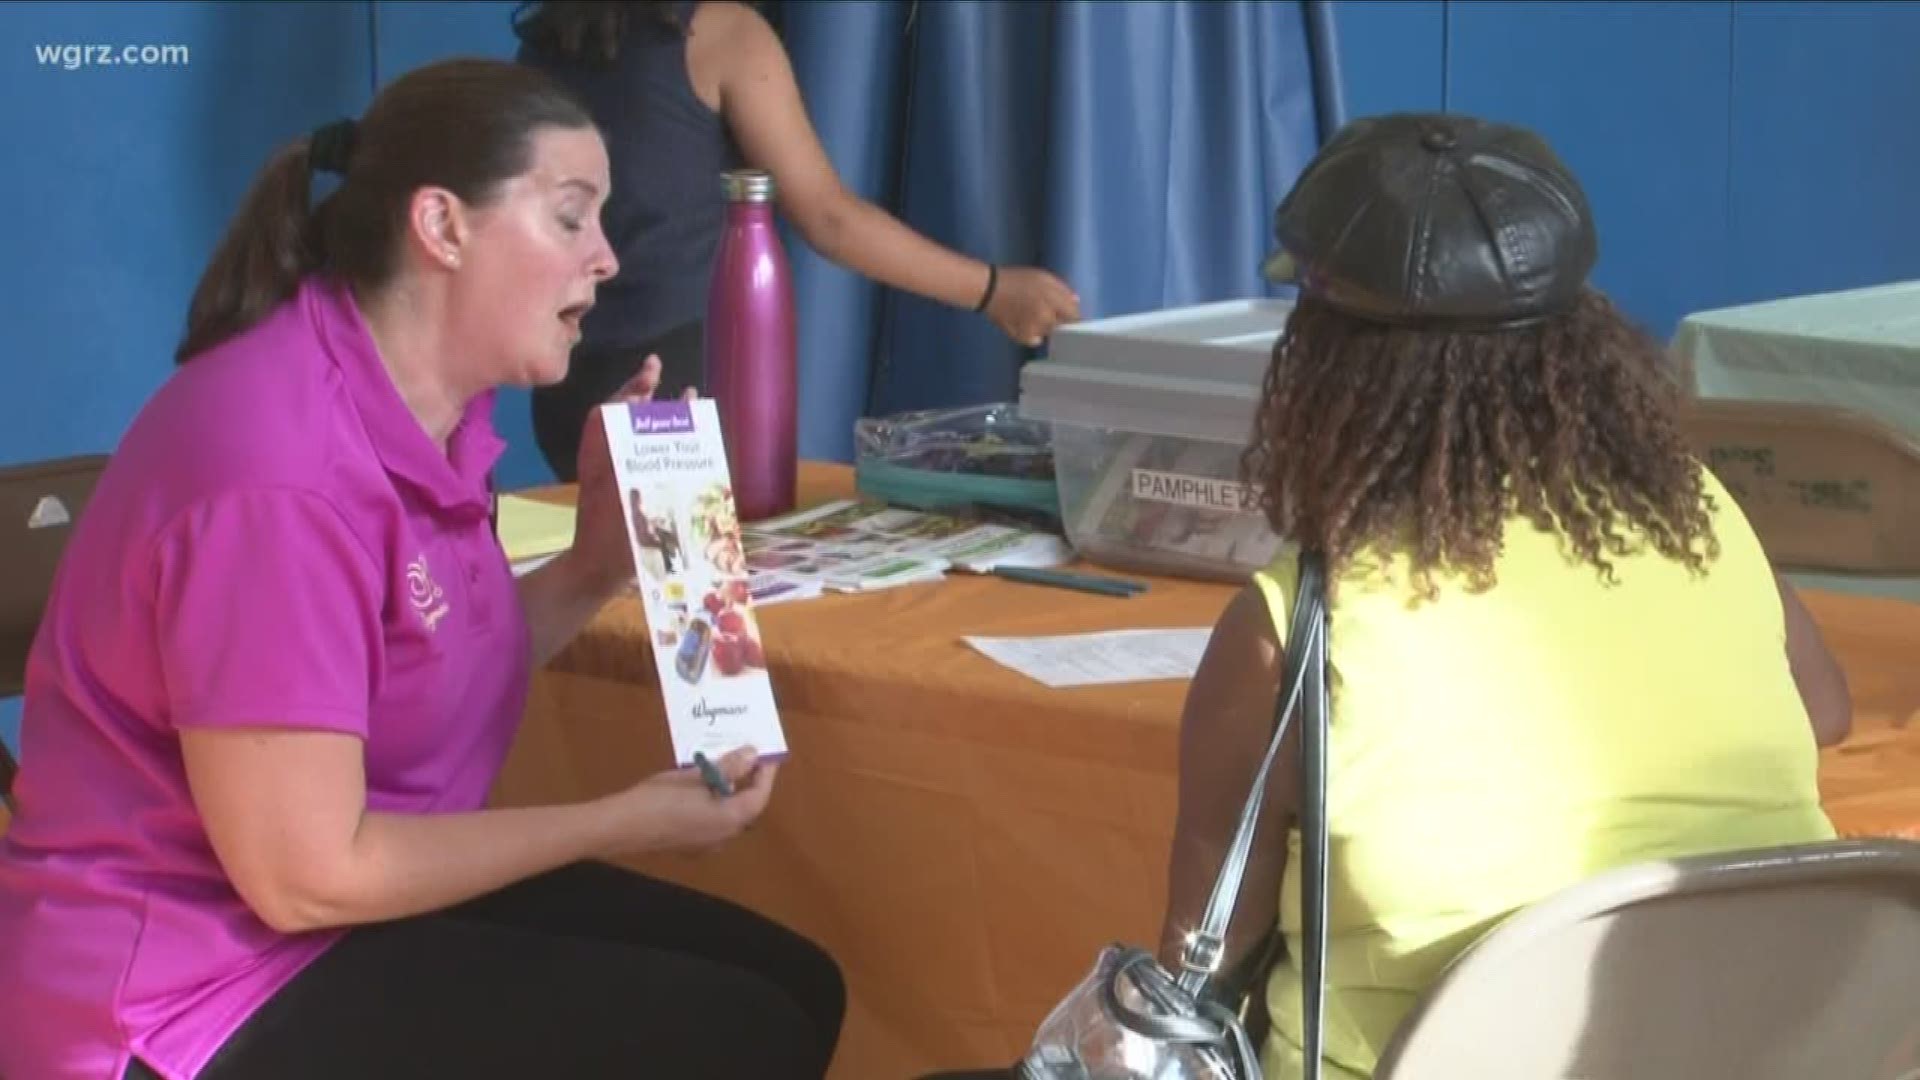 The Independent Health Foundation gave away backpacks of necessities at its Good for the Neighborhood event Wednesday evening